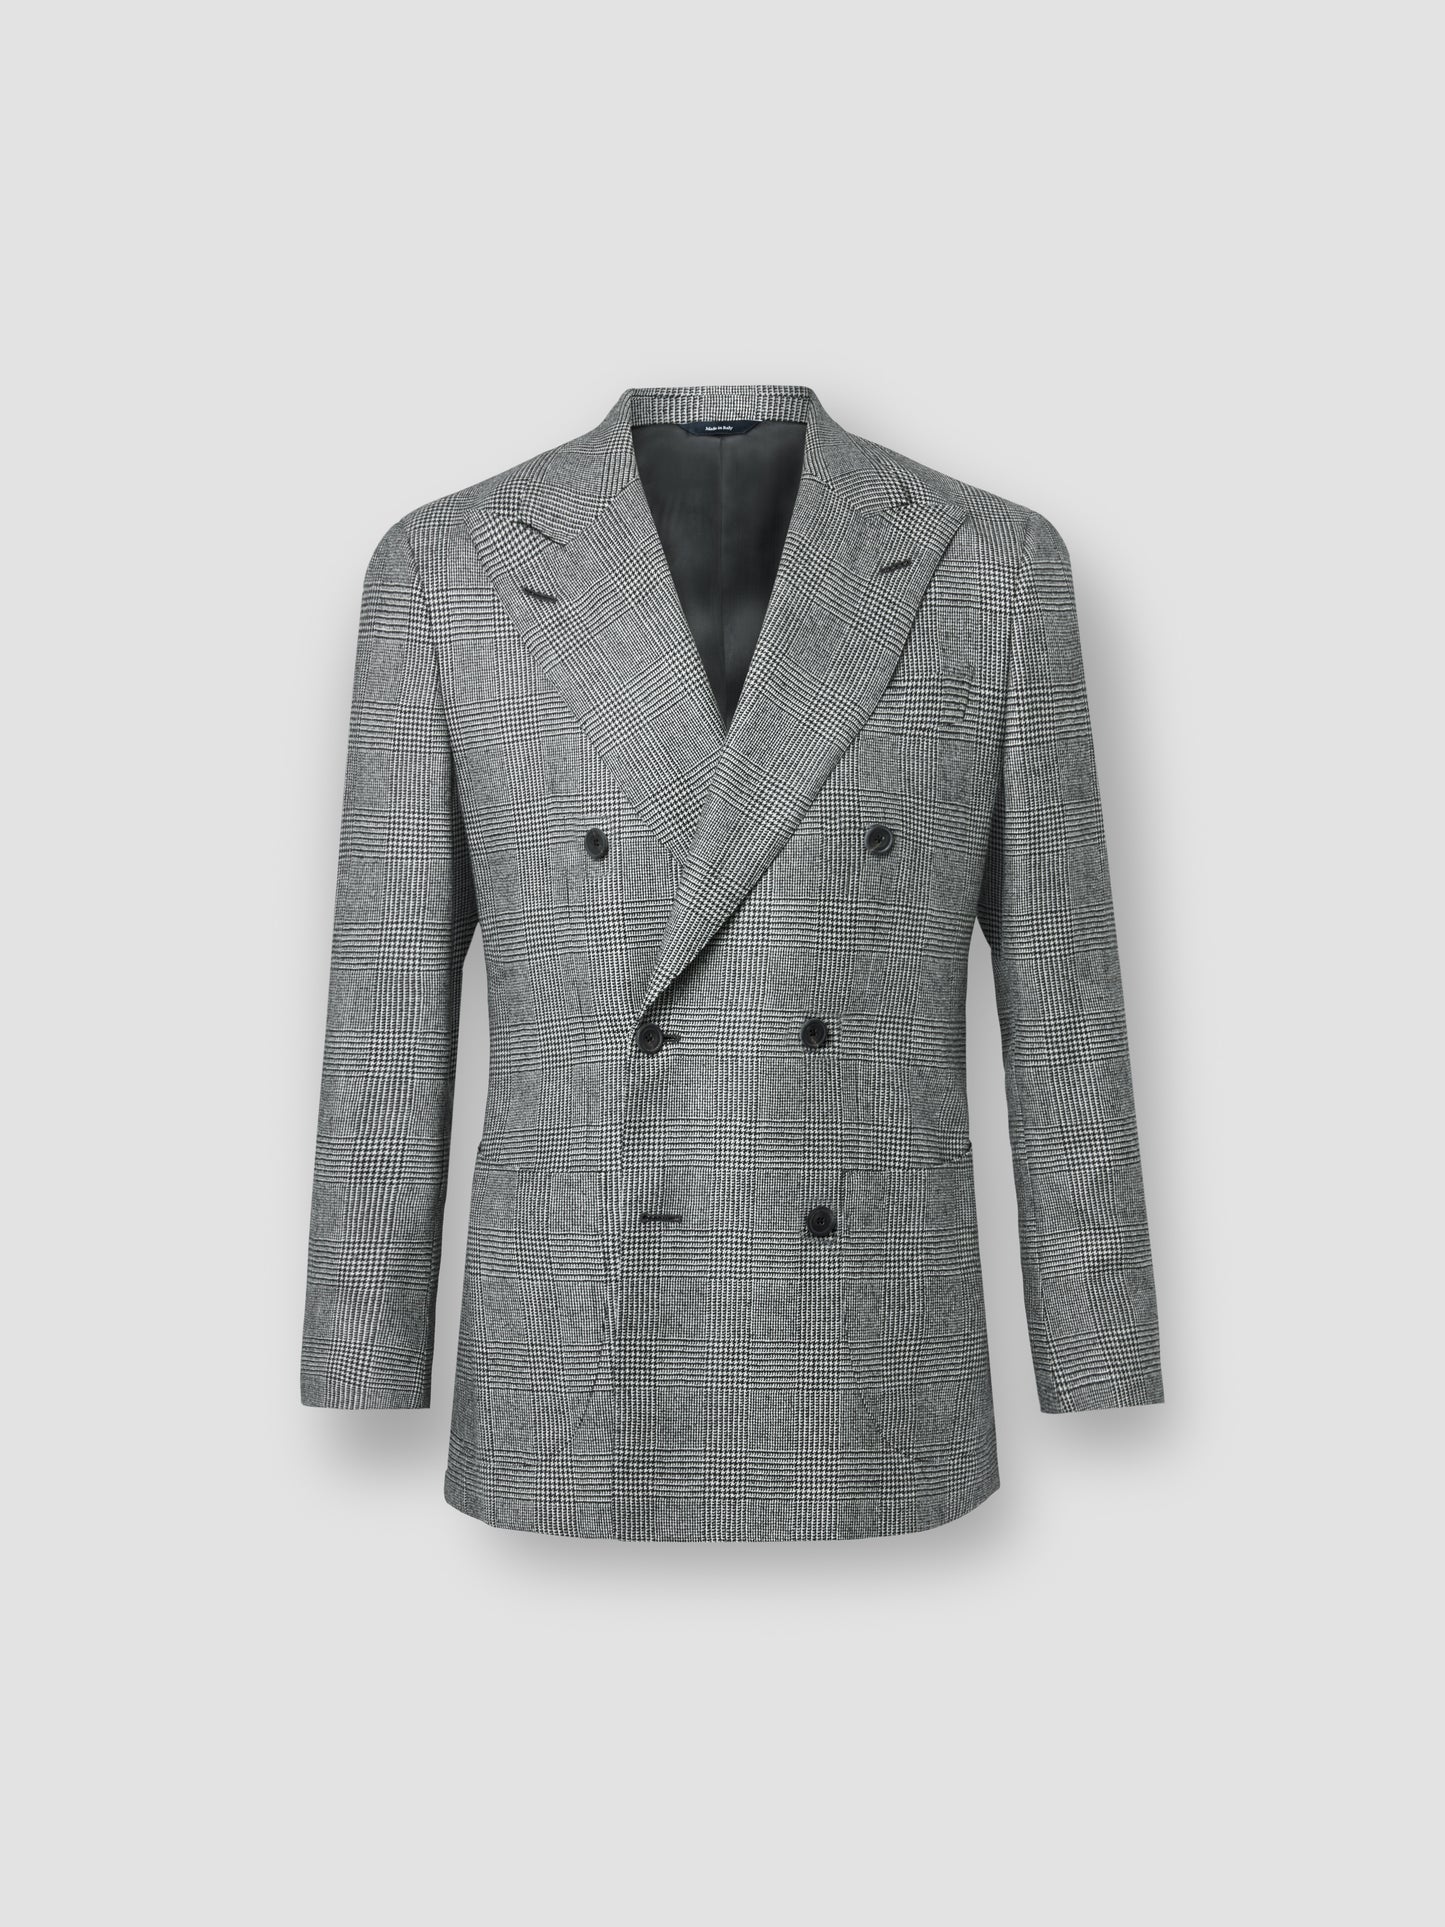 Double Breasted Wool Patch Pocket Suit Black/White Jacket Product Image